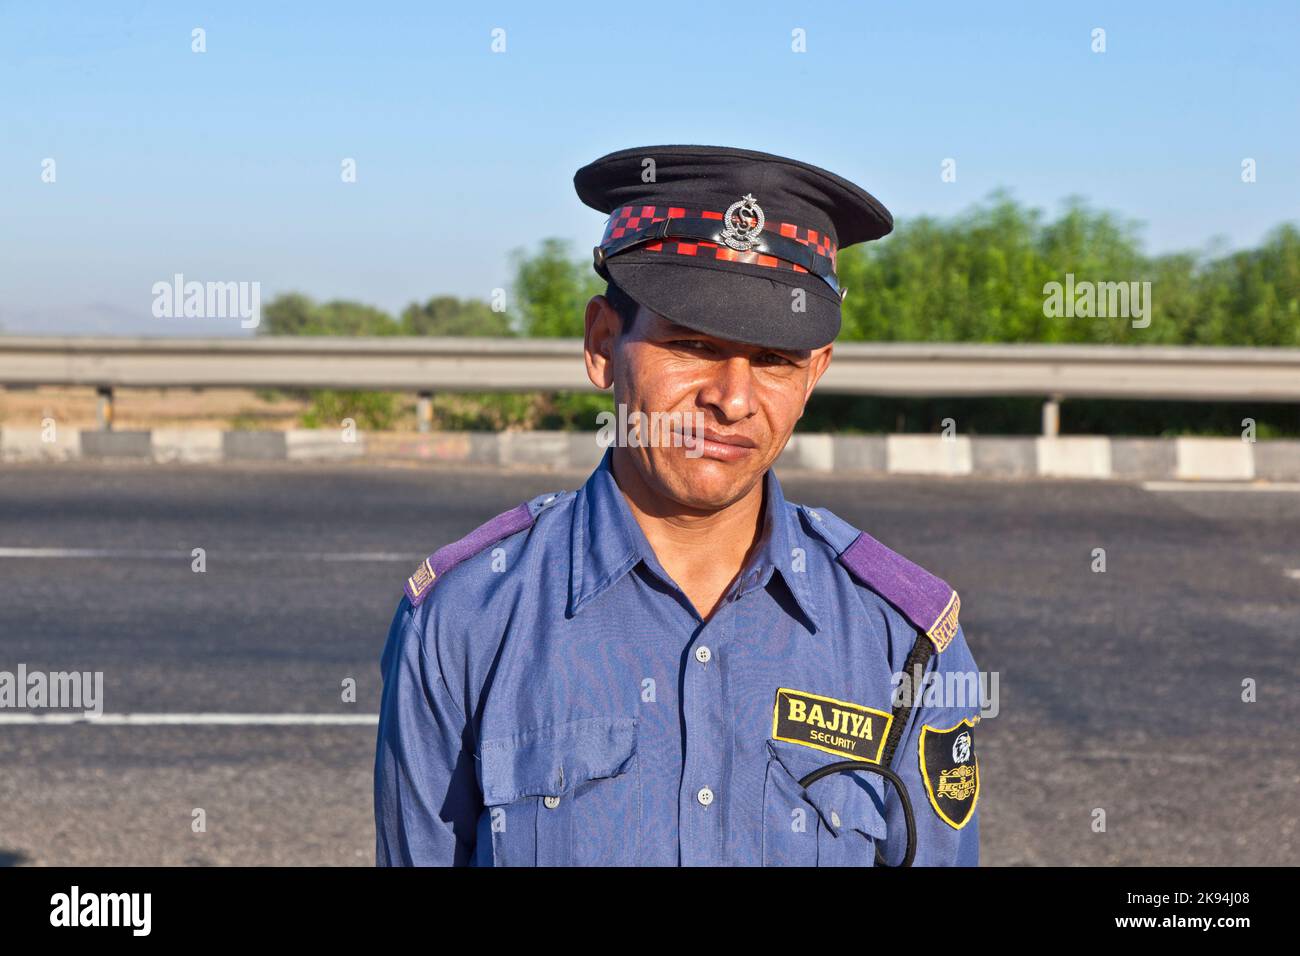 JAIPUR, INDIA - NOV 12: A private guardin uniform protects the parking place and the restaurant at the highway Delhi - JAIPUT on November 11,2011 in D Stock Photo